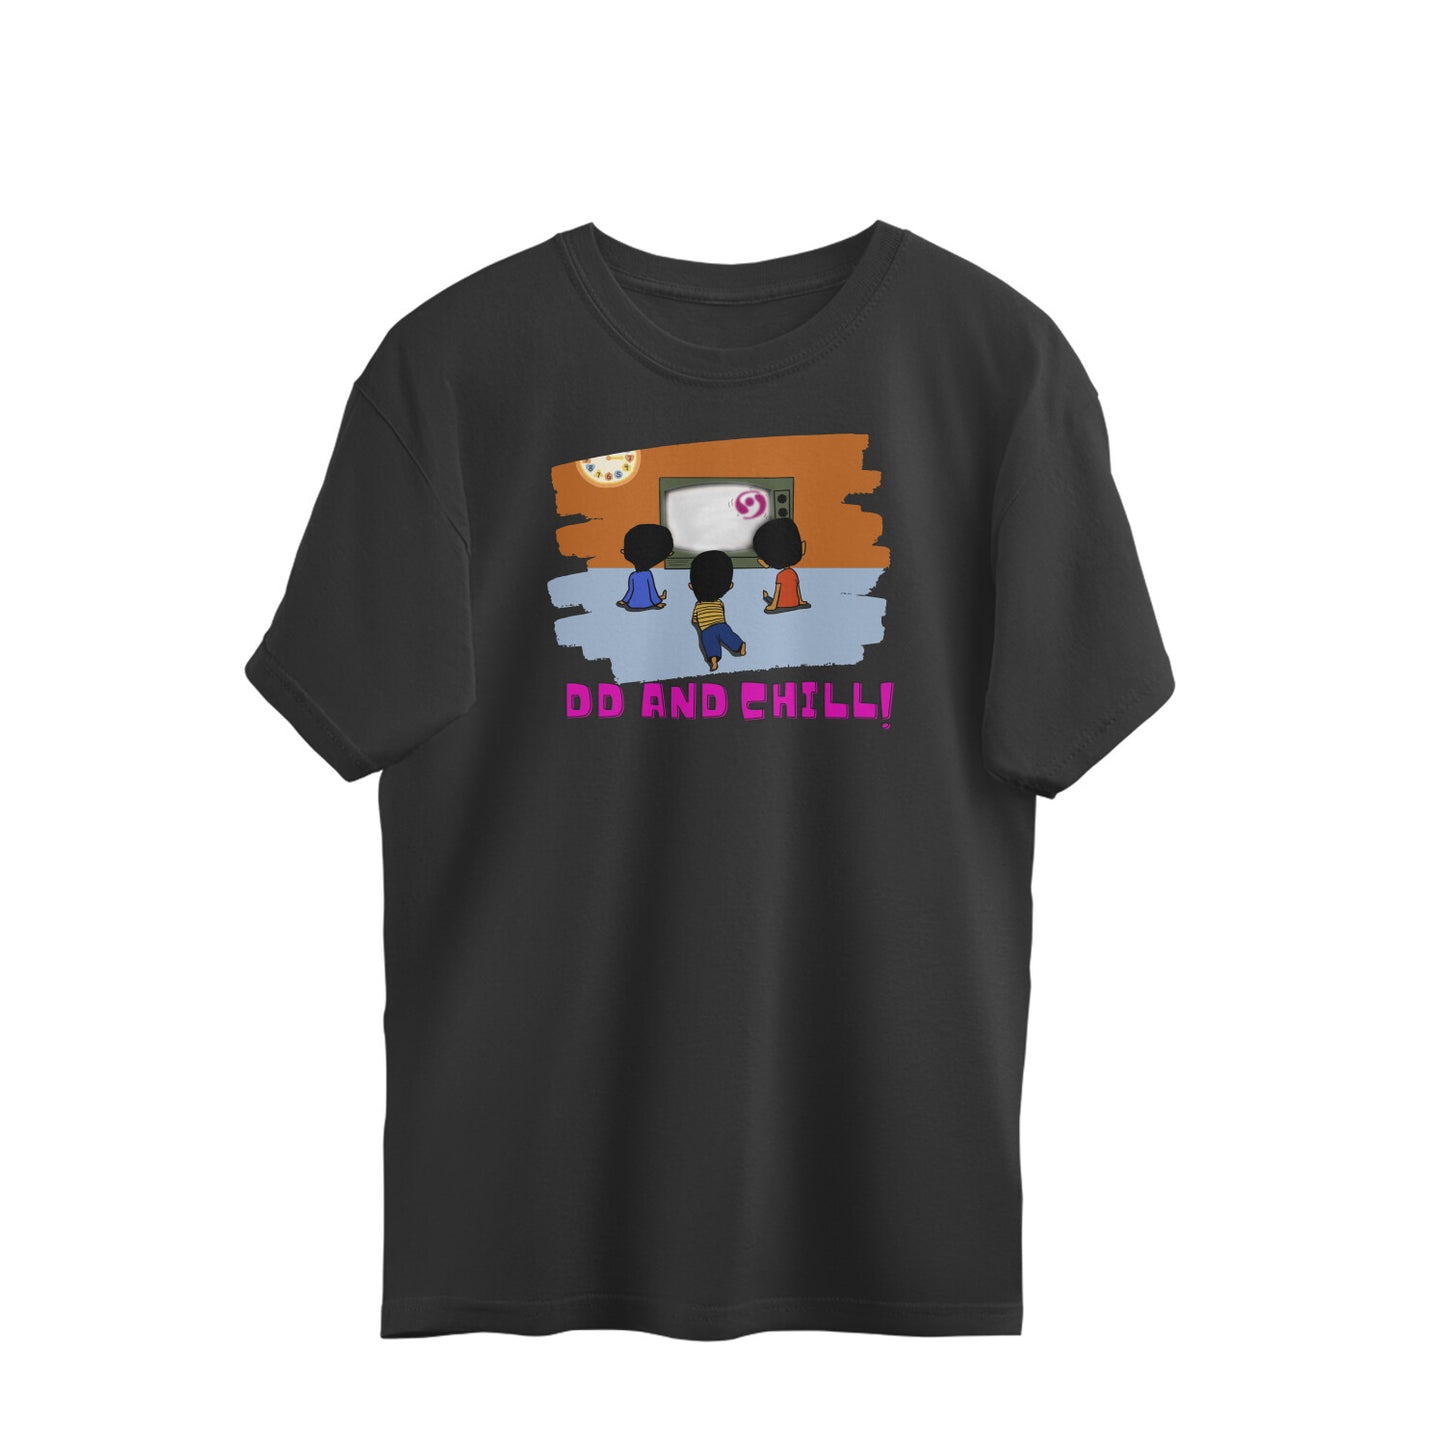 Bilkool DD and Chill With Friends Oversized T-Shirts